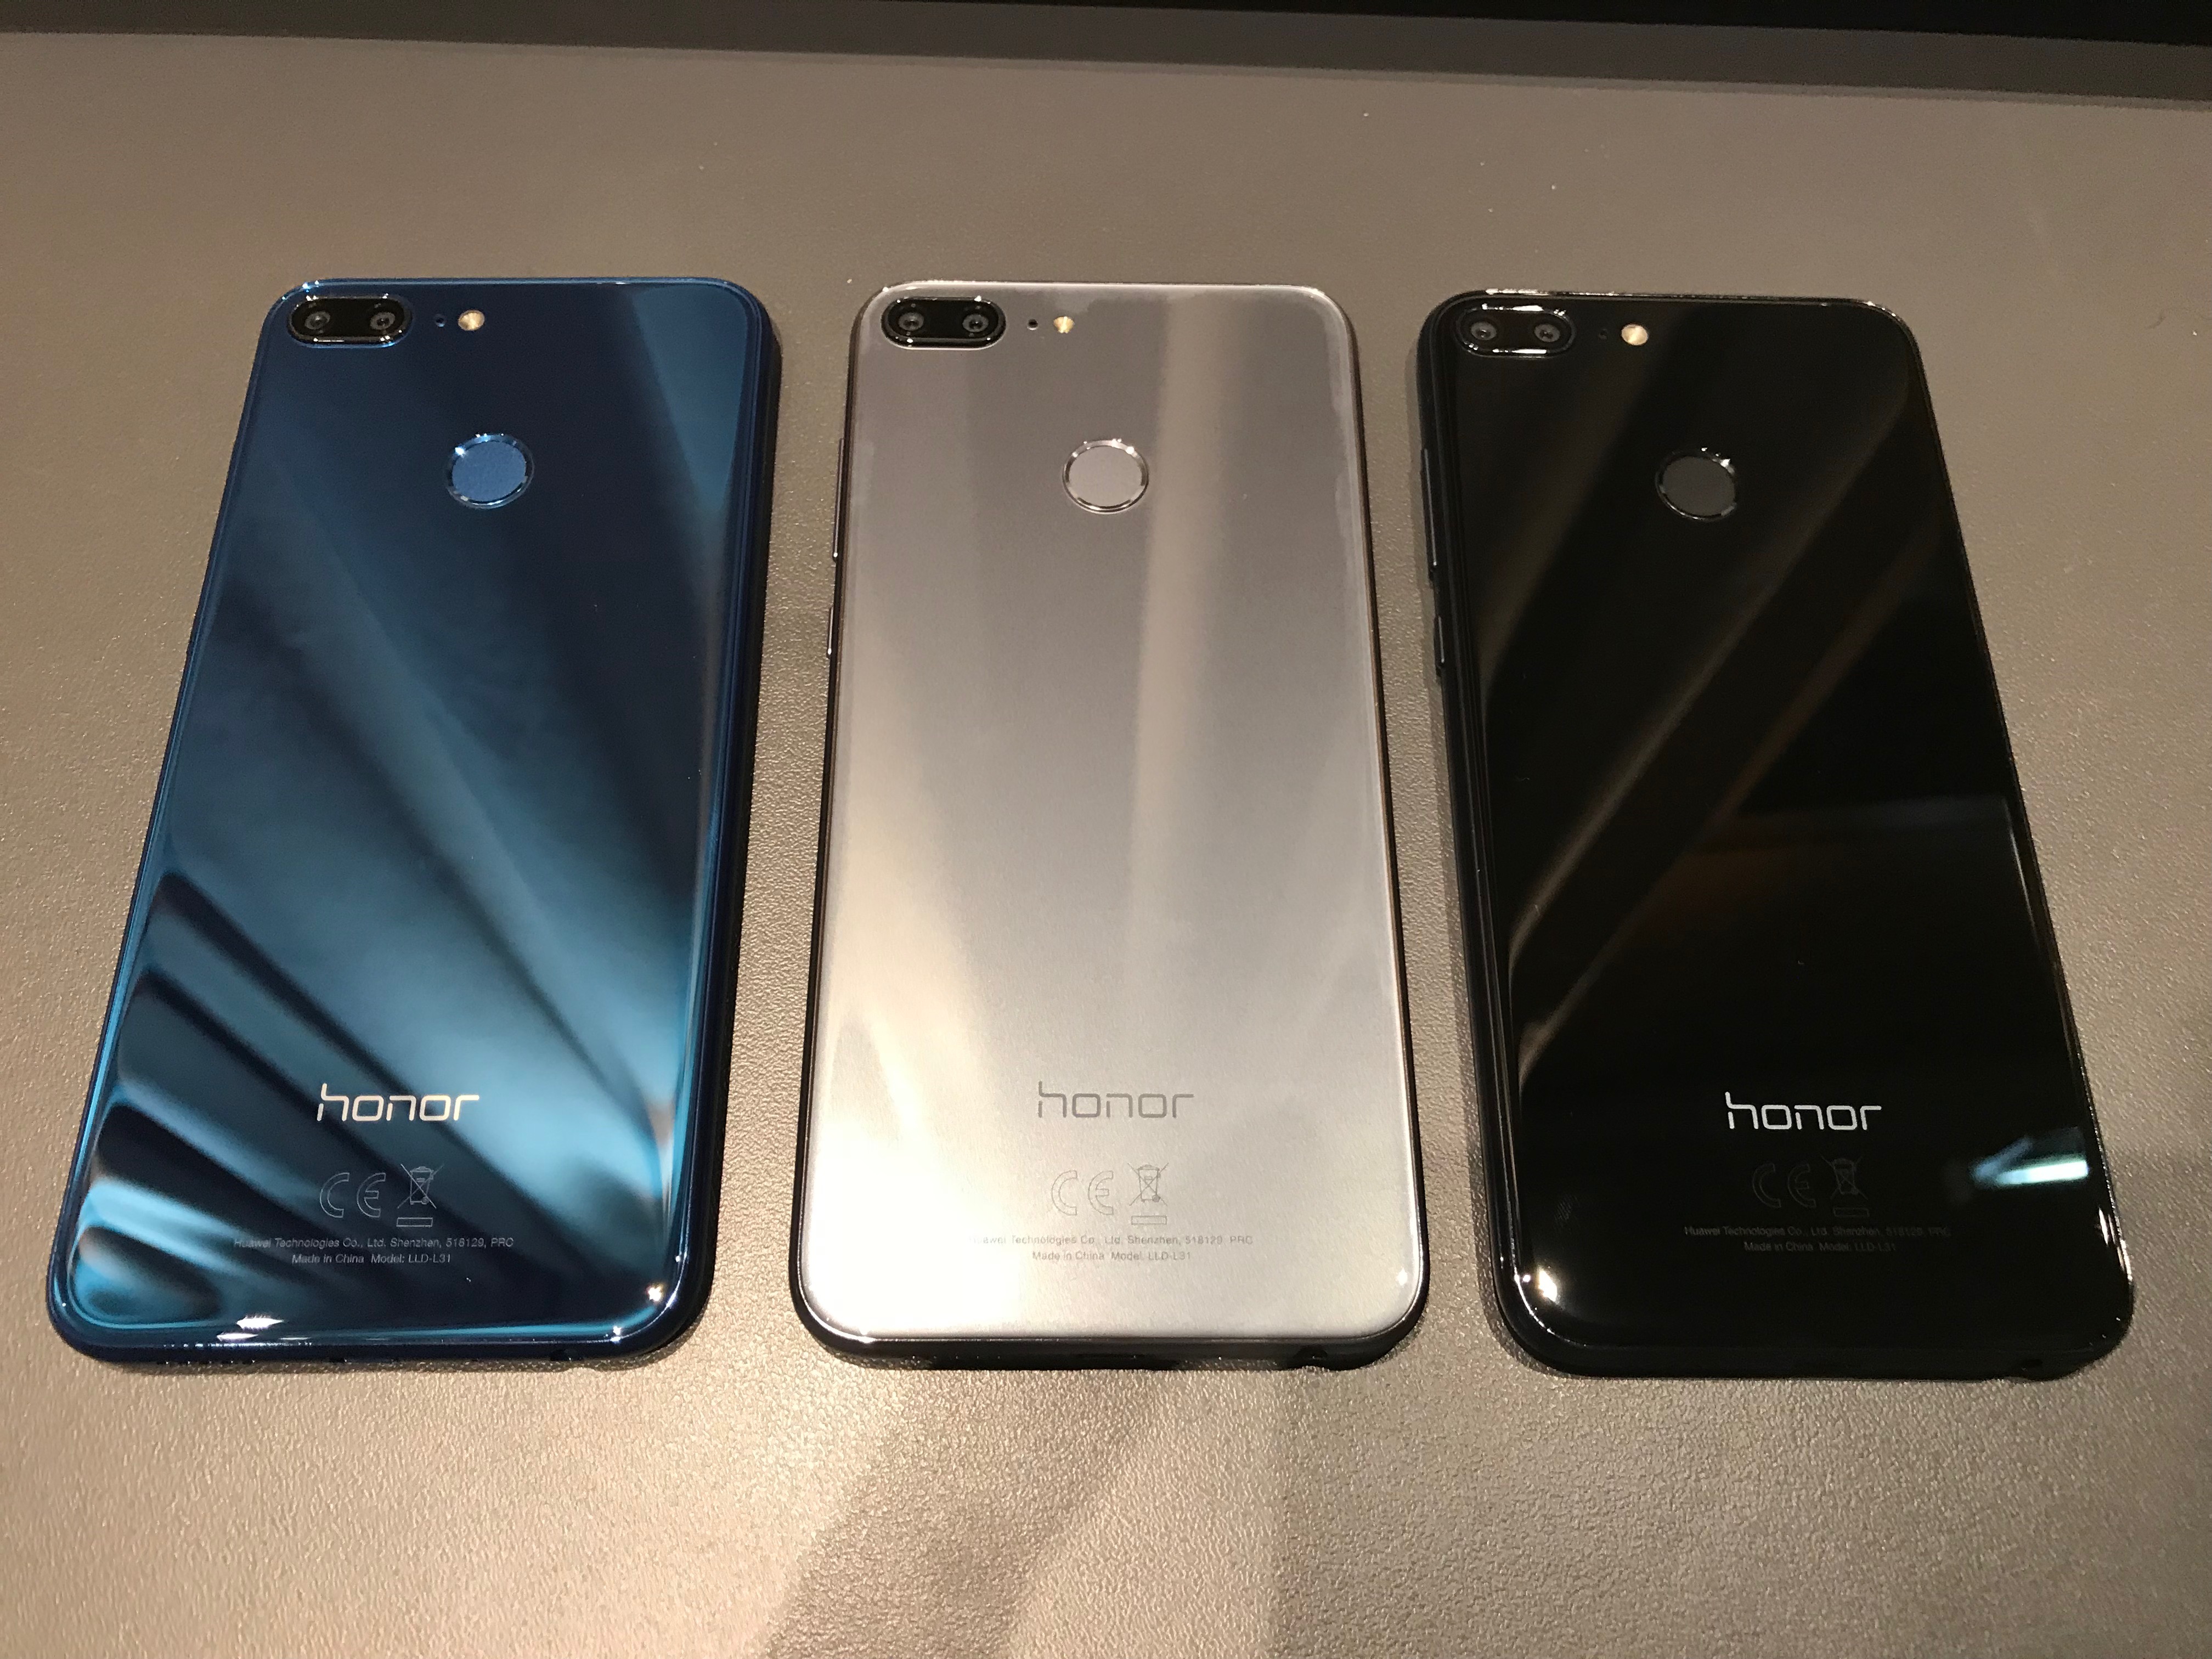 huawei-honor-9-youth-edition-honor-9-lite-could-debut-together-with-honor-v10-next-week